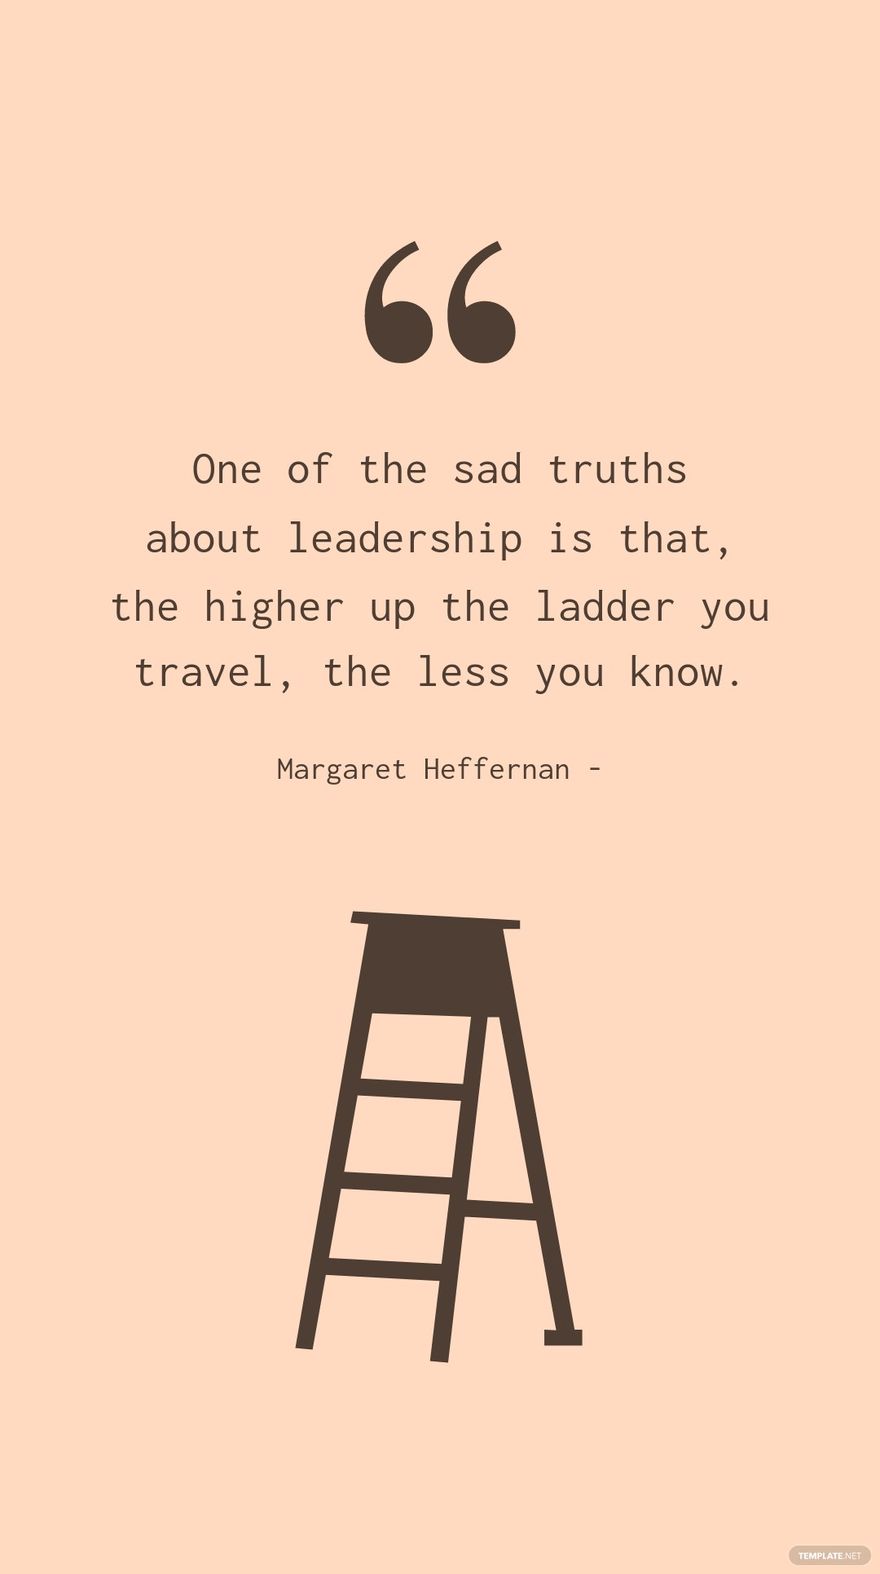 Free Margaret Heffernan - One of the sad truths about leadership is that, the higher up the ladder you travel, the less you know.